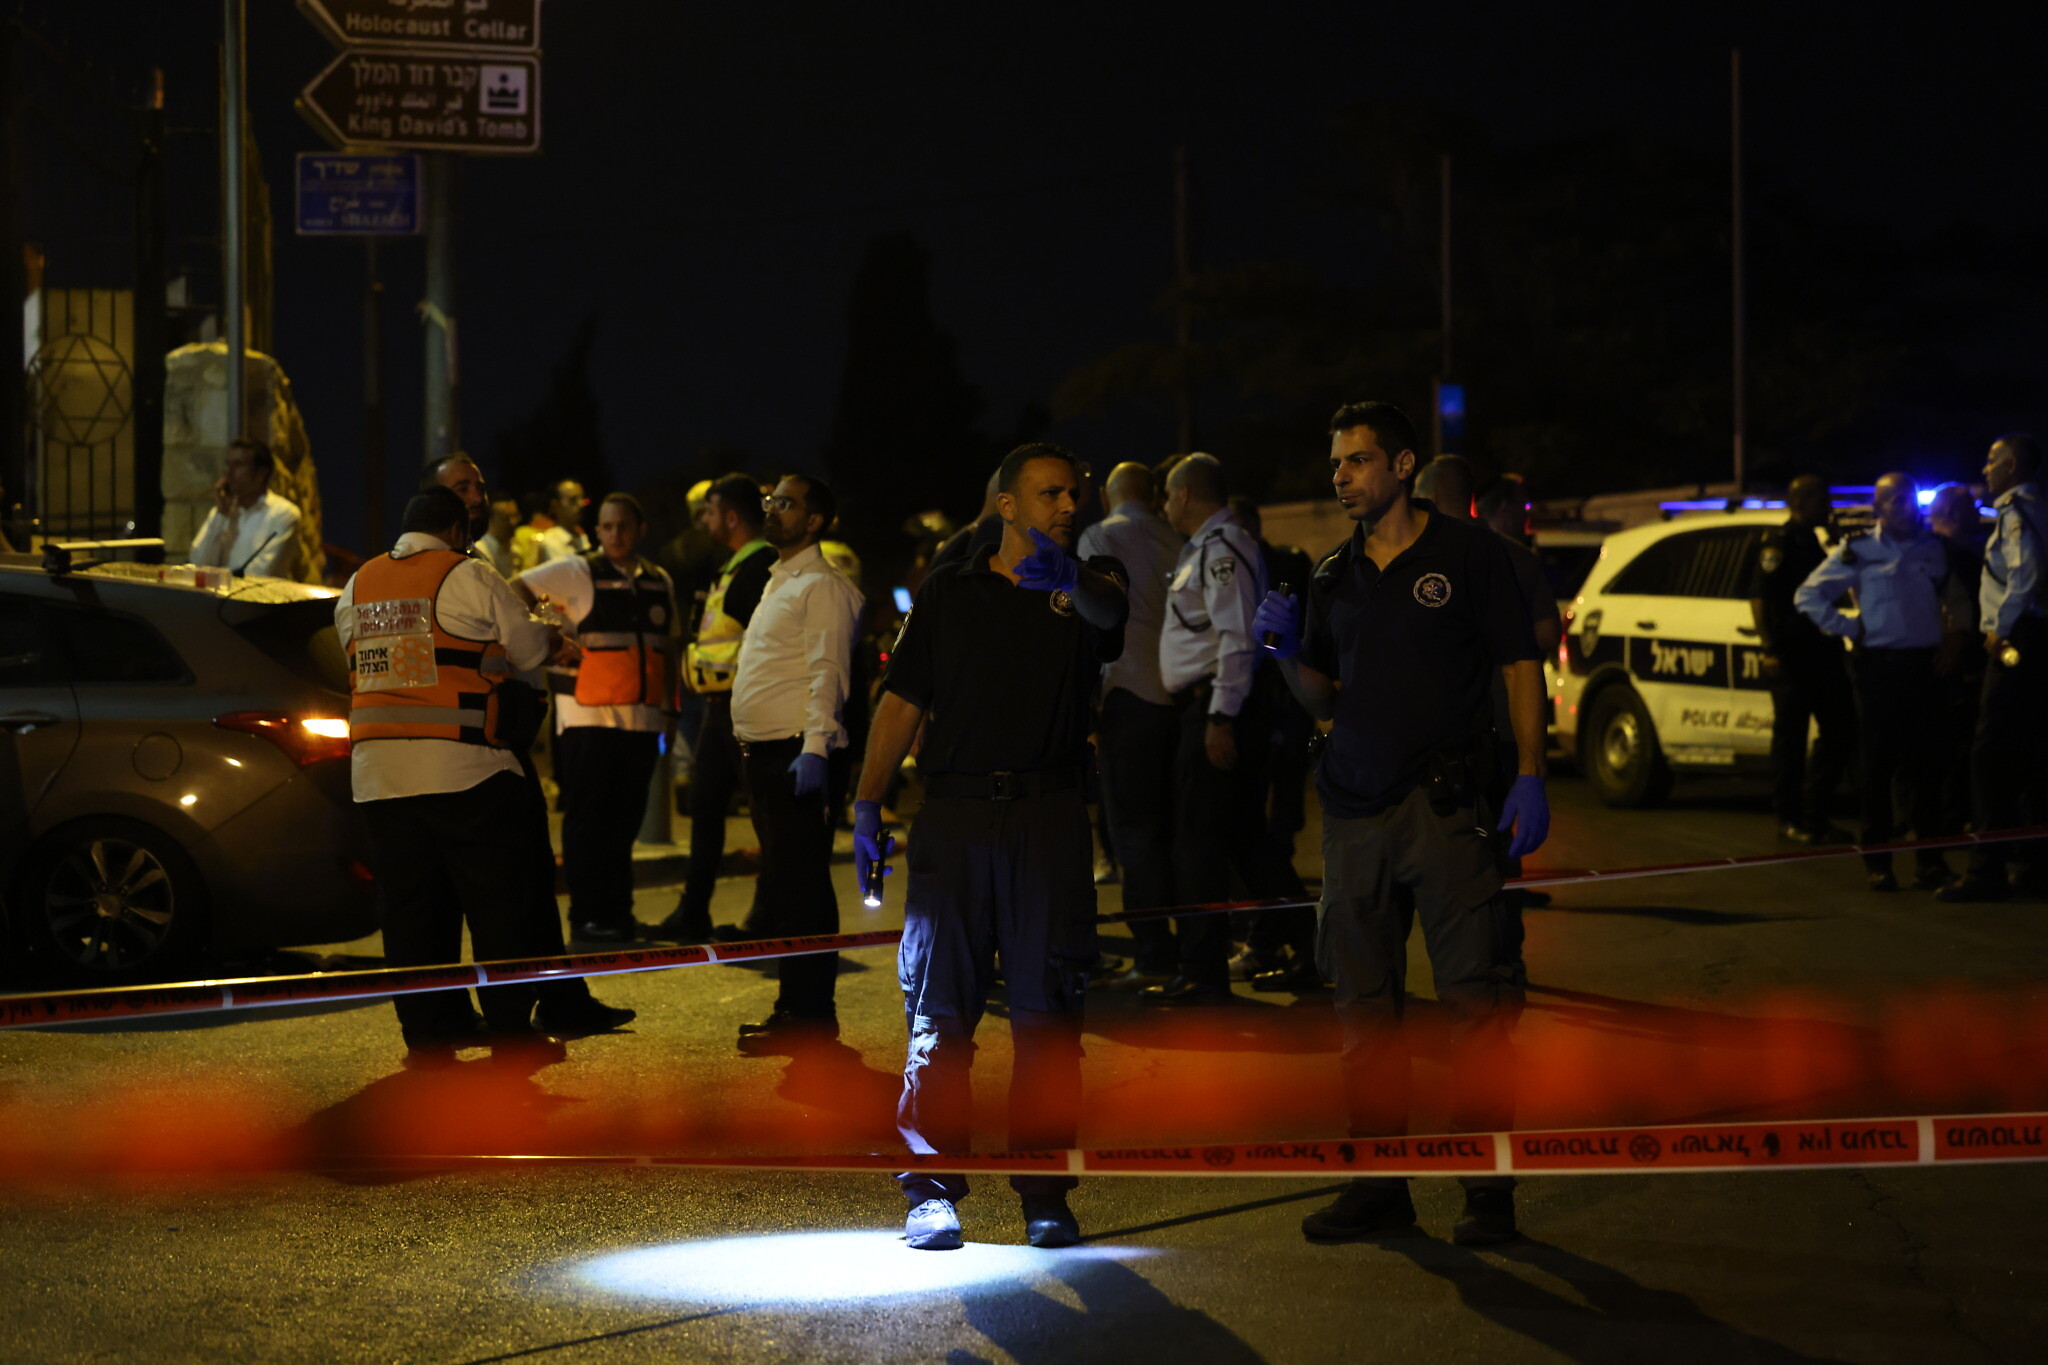 Screams of terror': 7 hurt, including 2 seriously, in shooting near Western  Wall | The Times of Israel